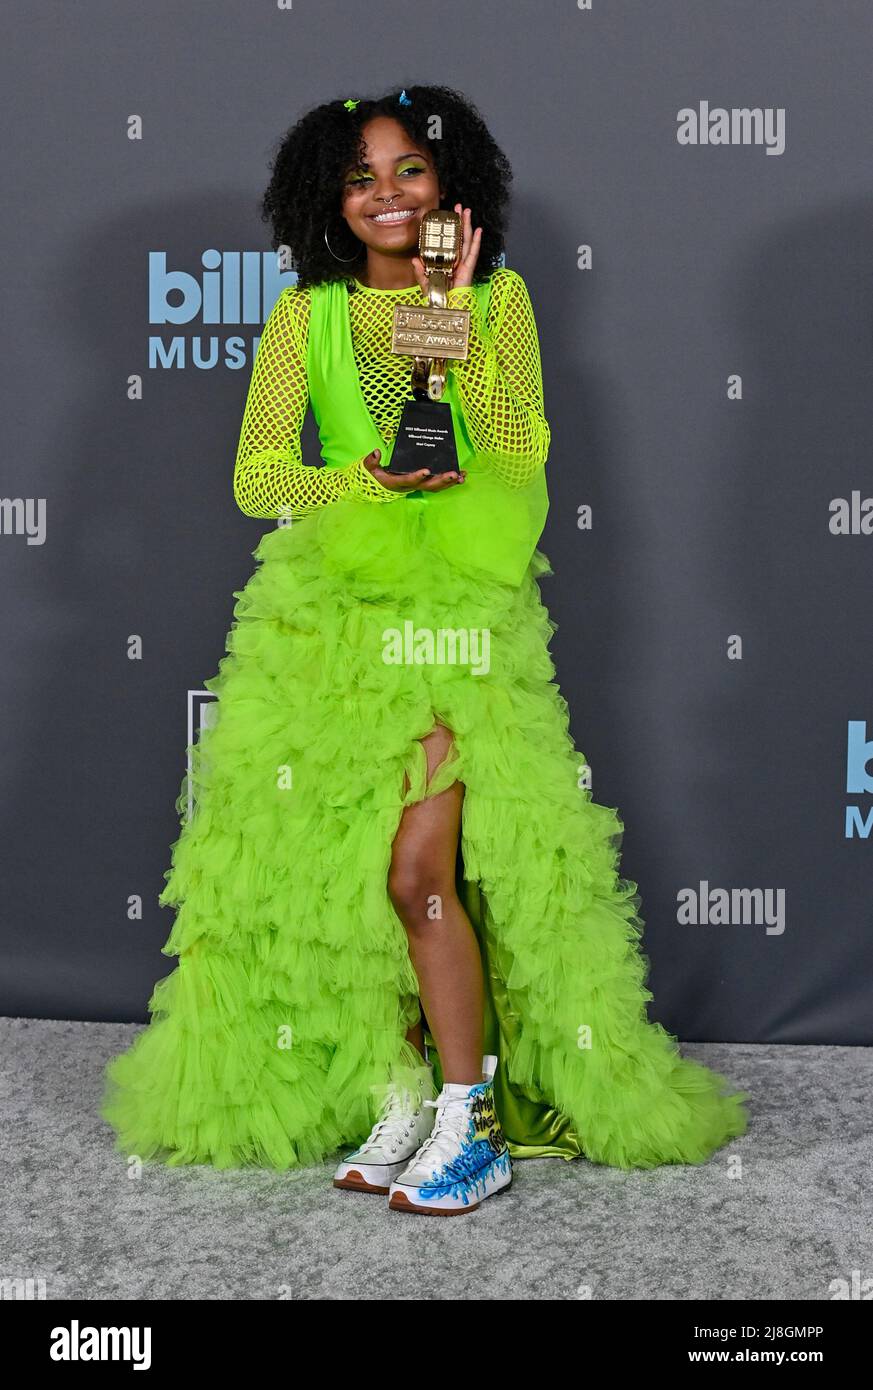 Las Vegas, United States. 16th May, 2022. Mari Copeny appears backstage with her award during the annual Billboard Music Awards held at the MGM Grand Garden Arena in Las Vegas on May 15, 2022. Mari Copeny was honored with the Change Maker Award. Photo by Jim Ruymen/UPI Credit: UPI/Alamy Live News Stock Photo